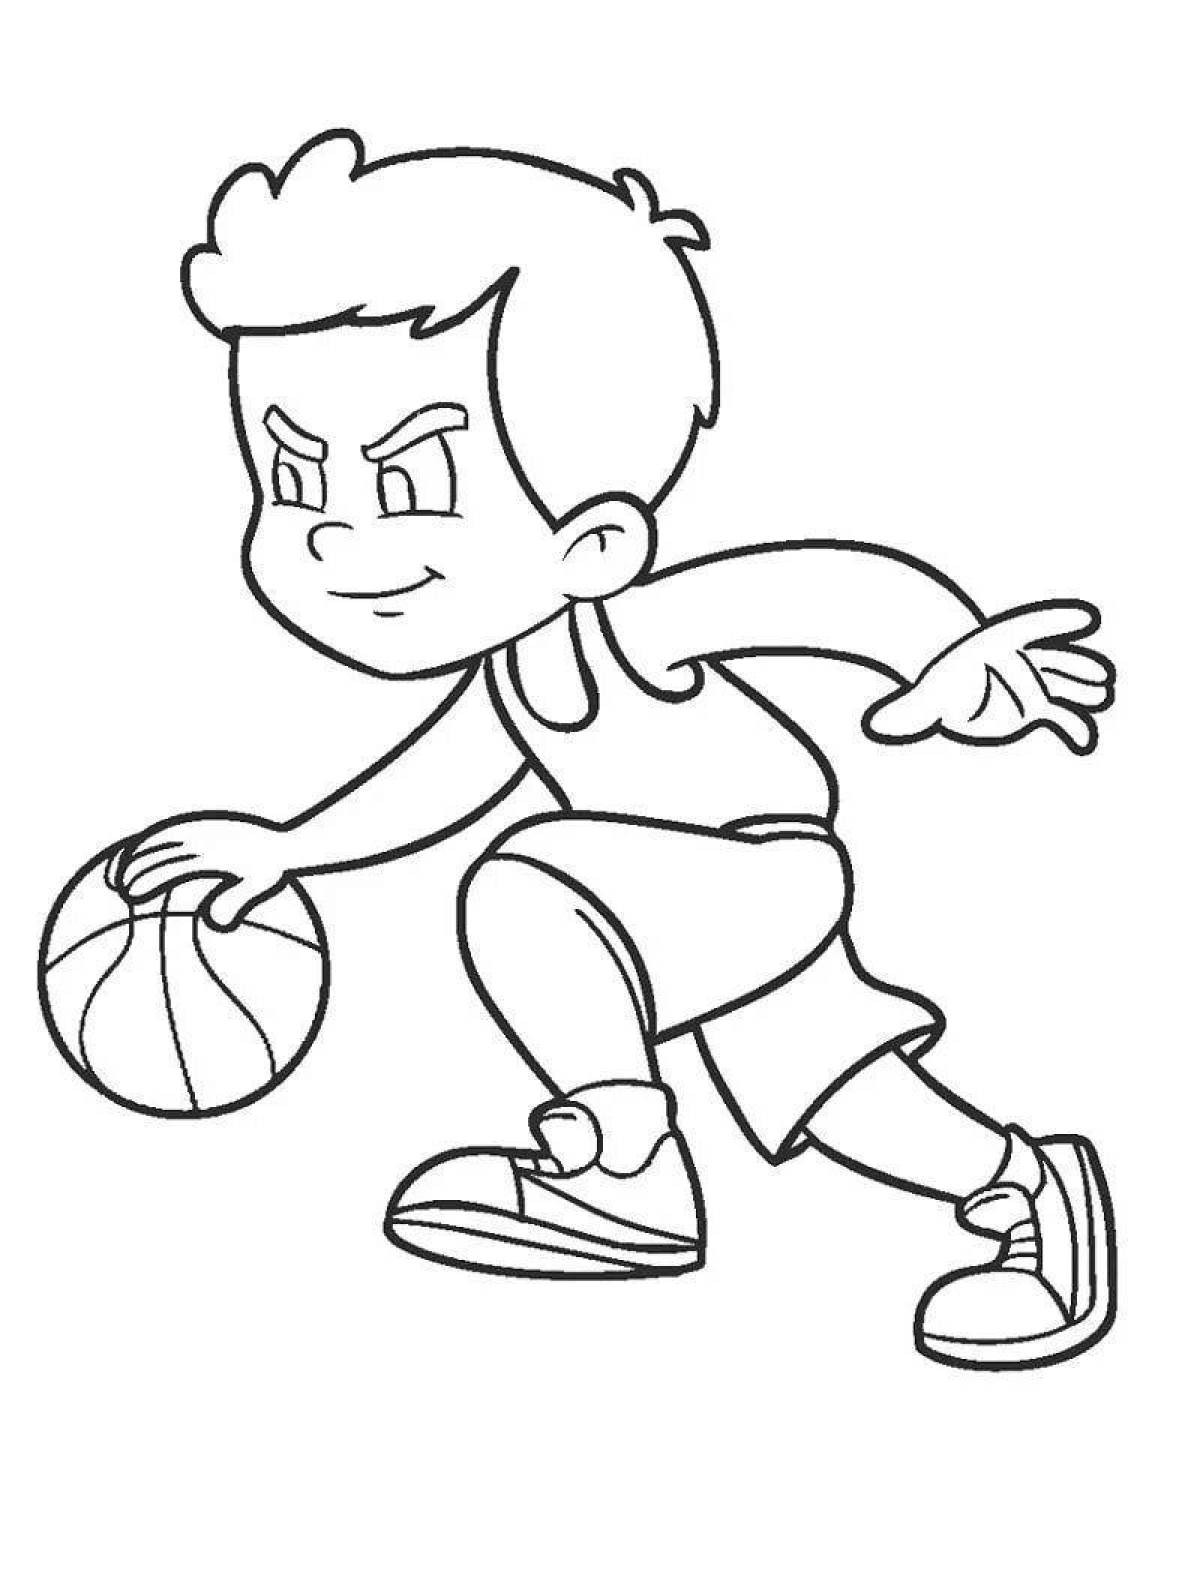 Bright sports coloring book for kids